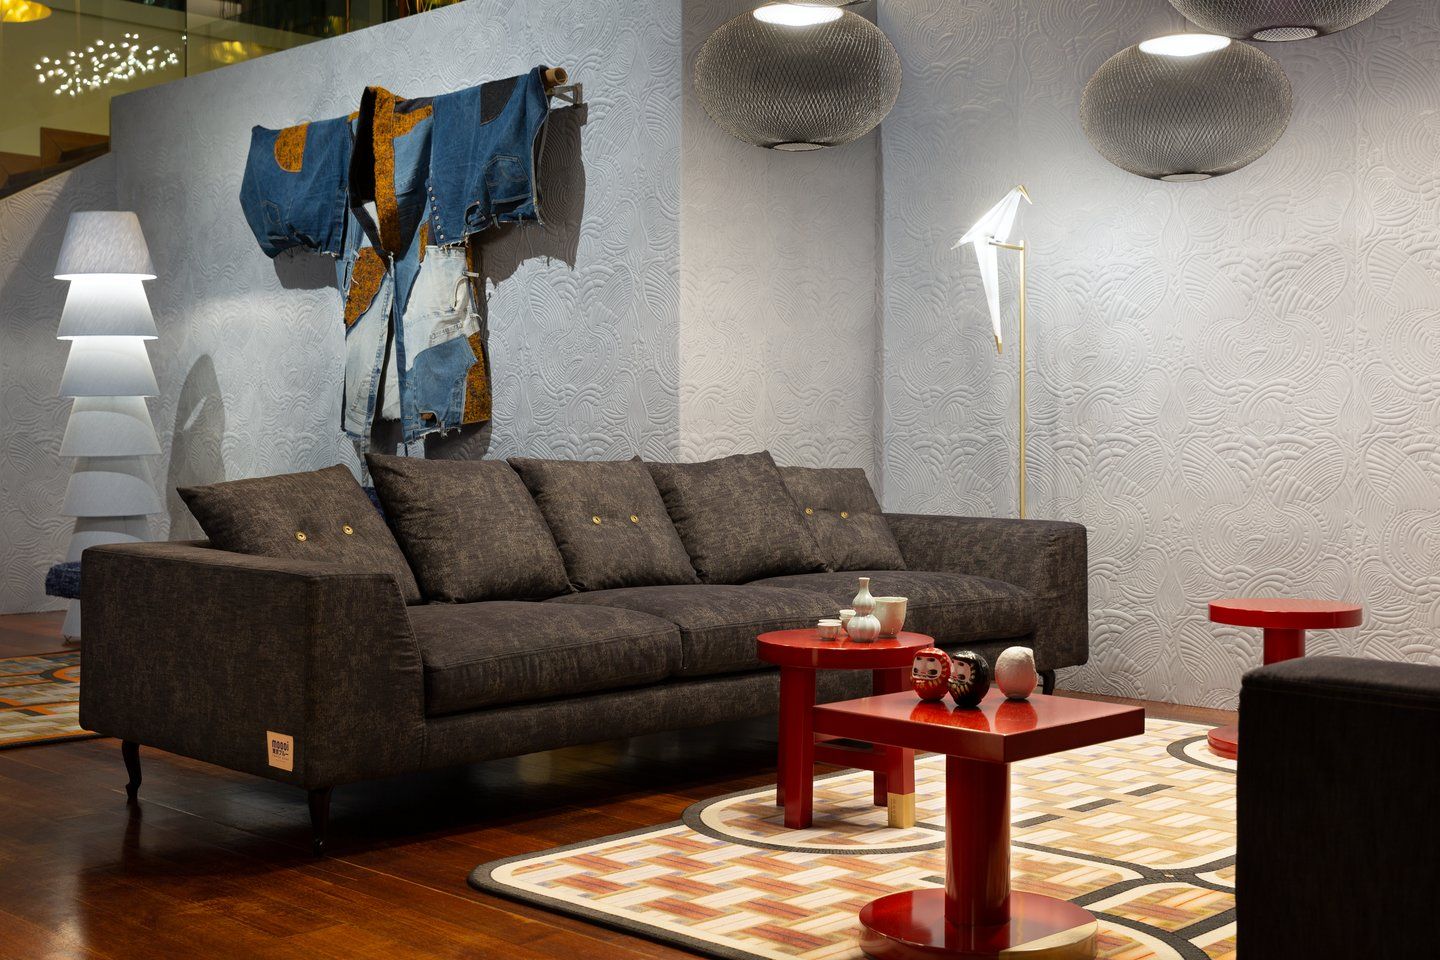 Floor lamp SET UP SHADES by Moooi